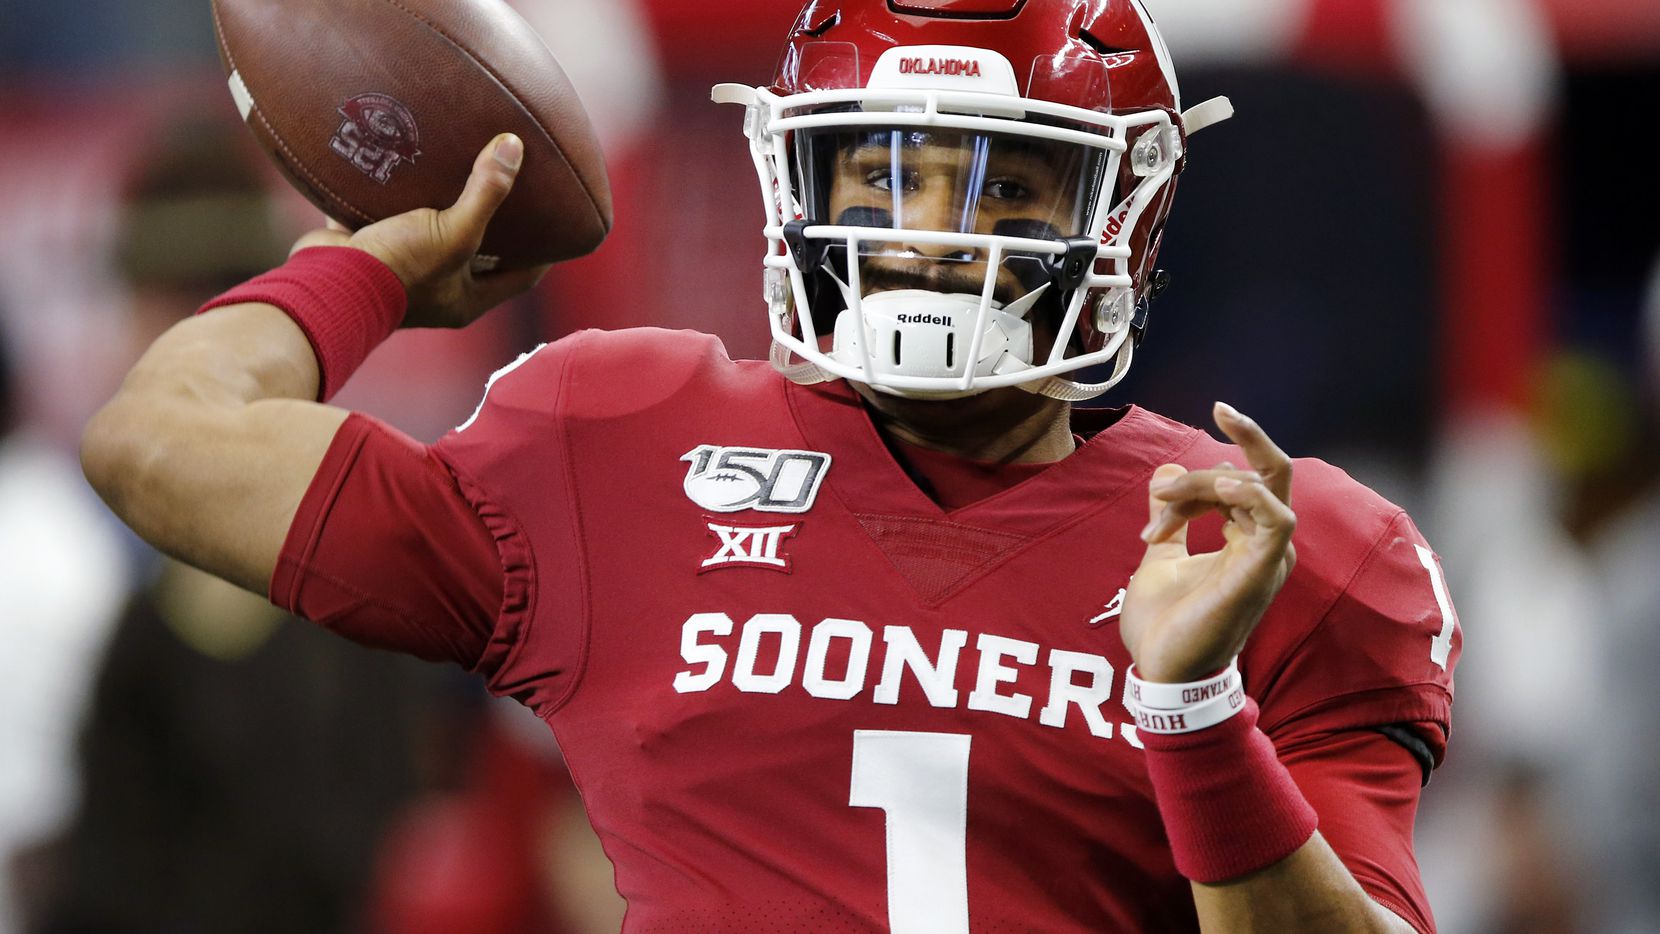 Oklahoma Sooners quarterback Jalen Hurts (1)  warms up his arm before facing the Baylor Bears in the Big 12 Championship at AT&T Stadium in Arlington, Saturday, December 7, 2019.